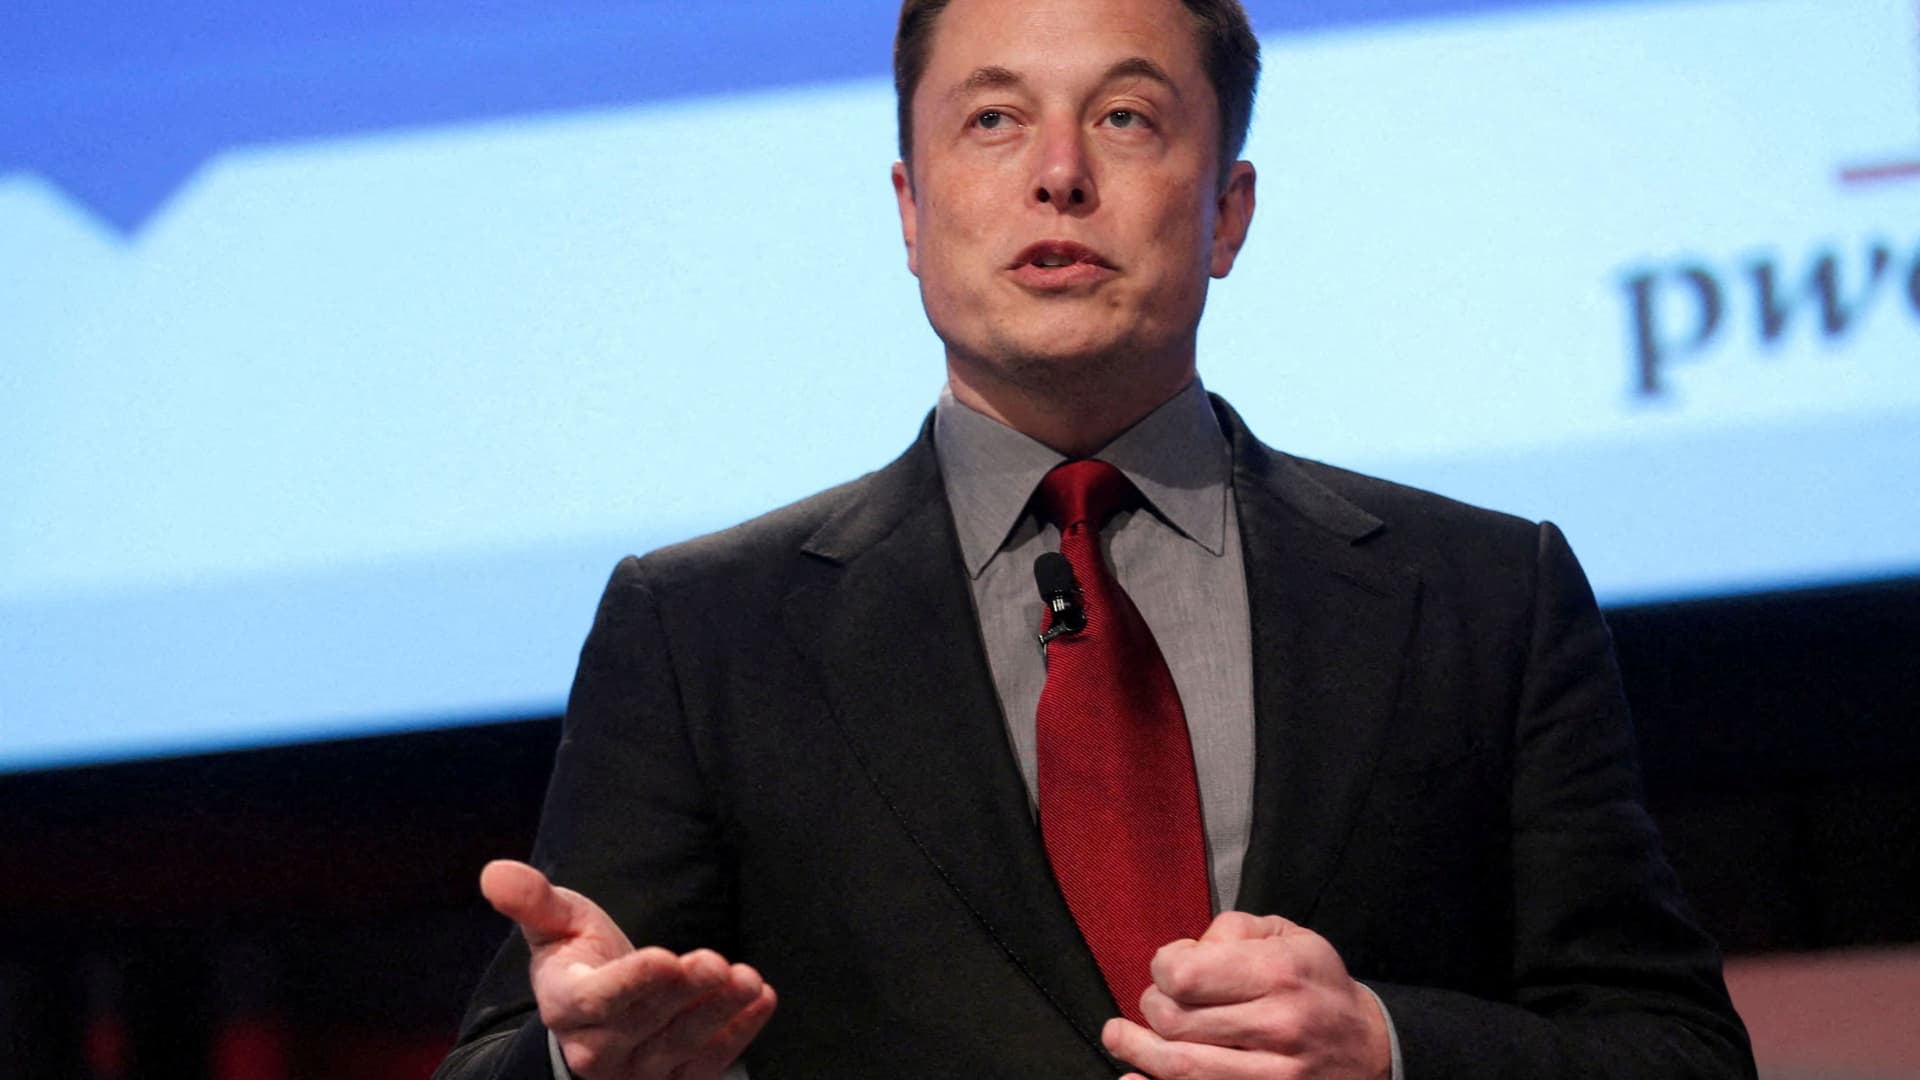 Elon Musk expected to serve as temporary Twitter CEO after deal closes